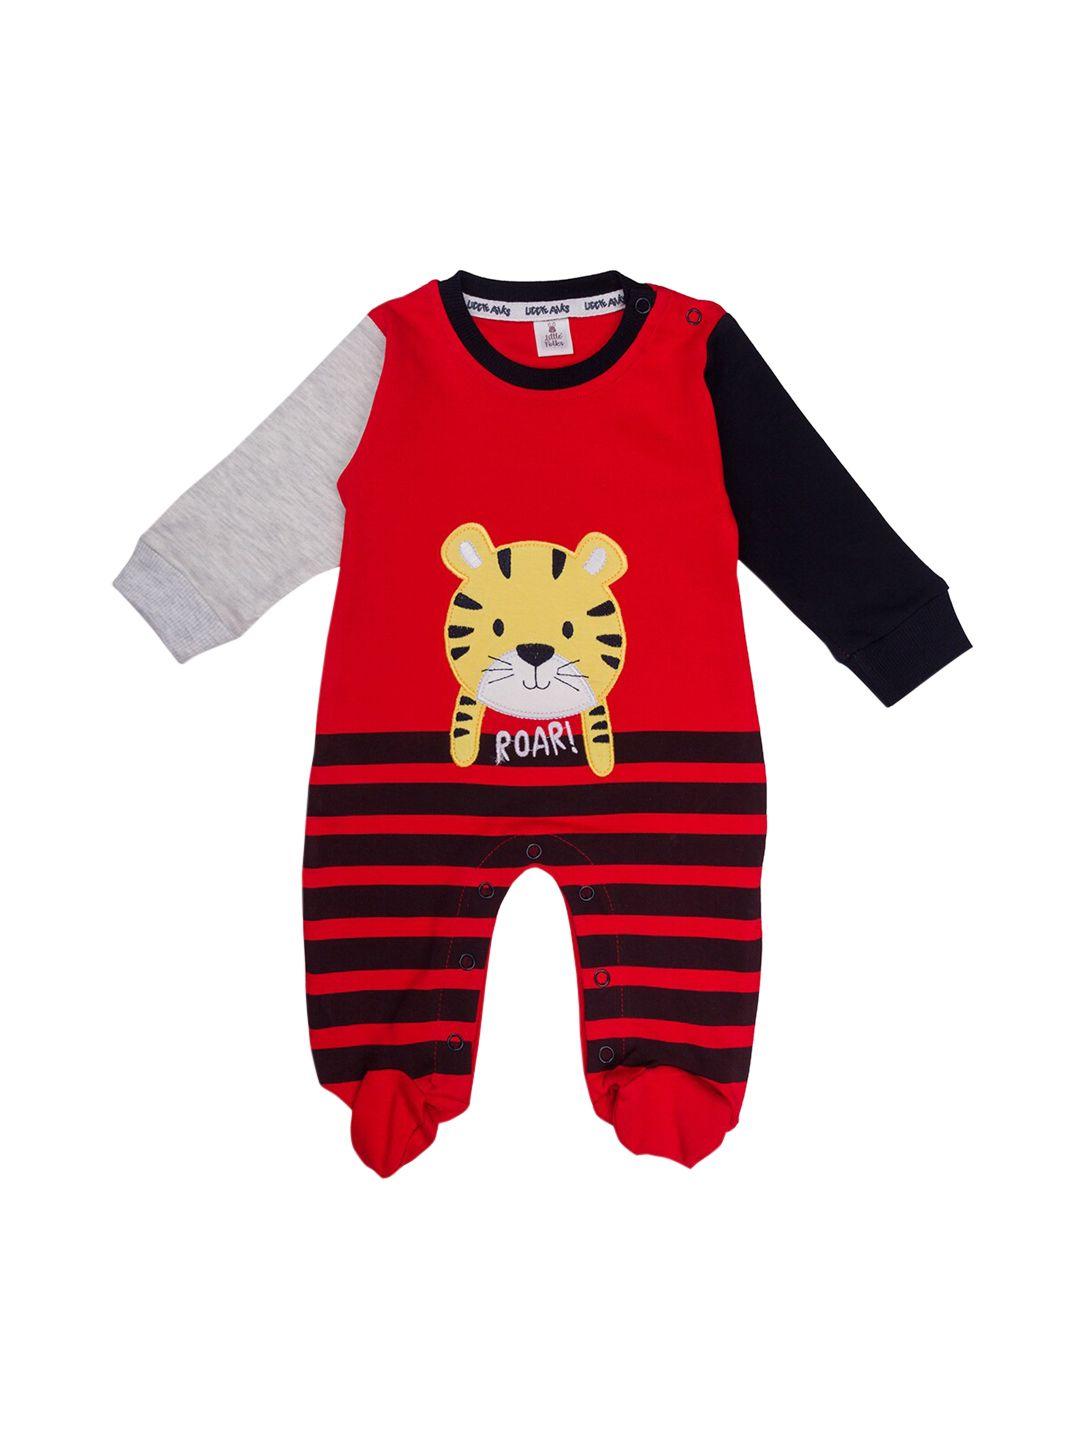 little-folks-kids-red-cotton-romper-with-booty